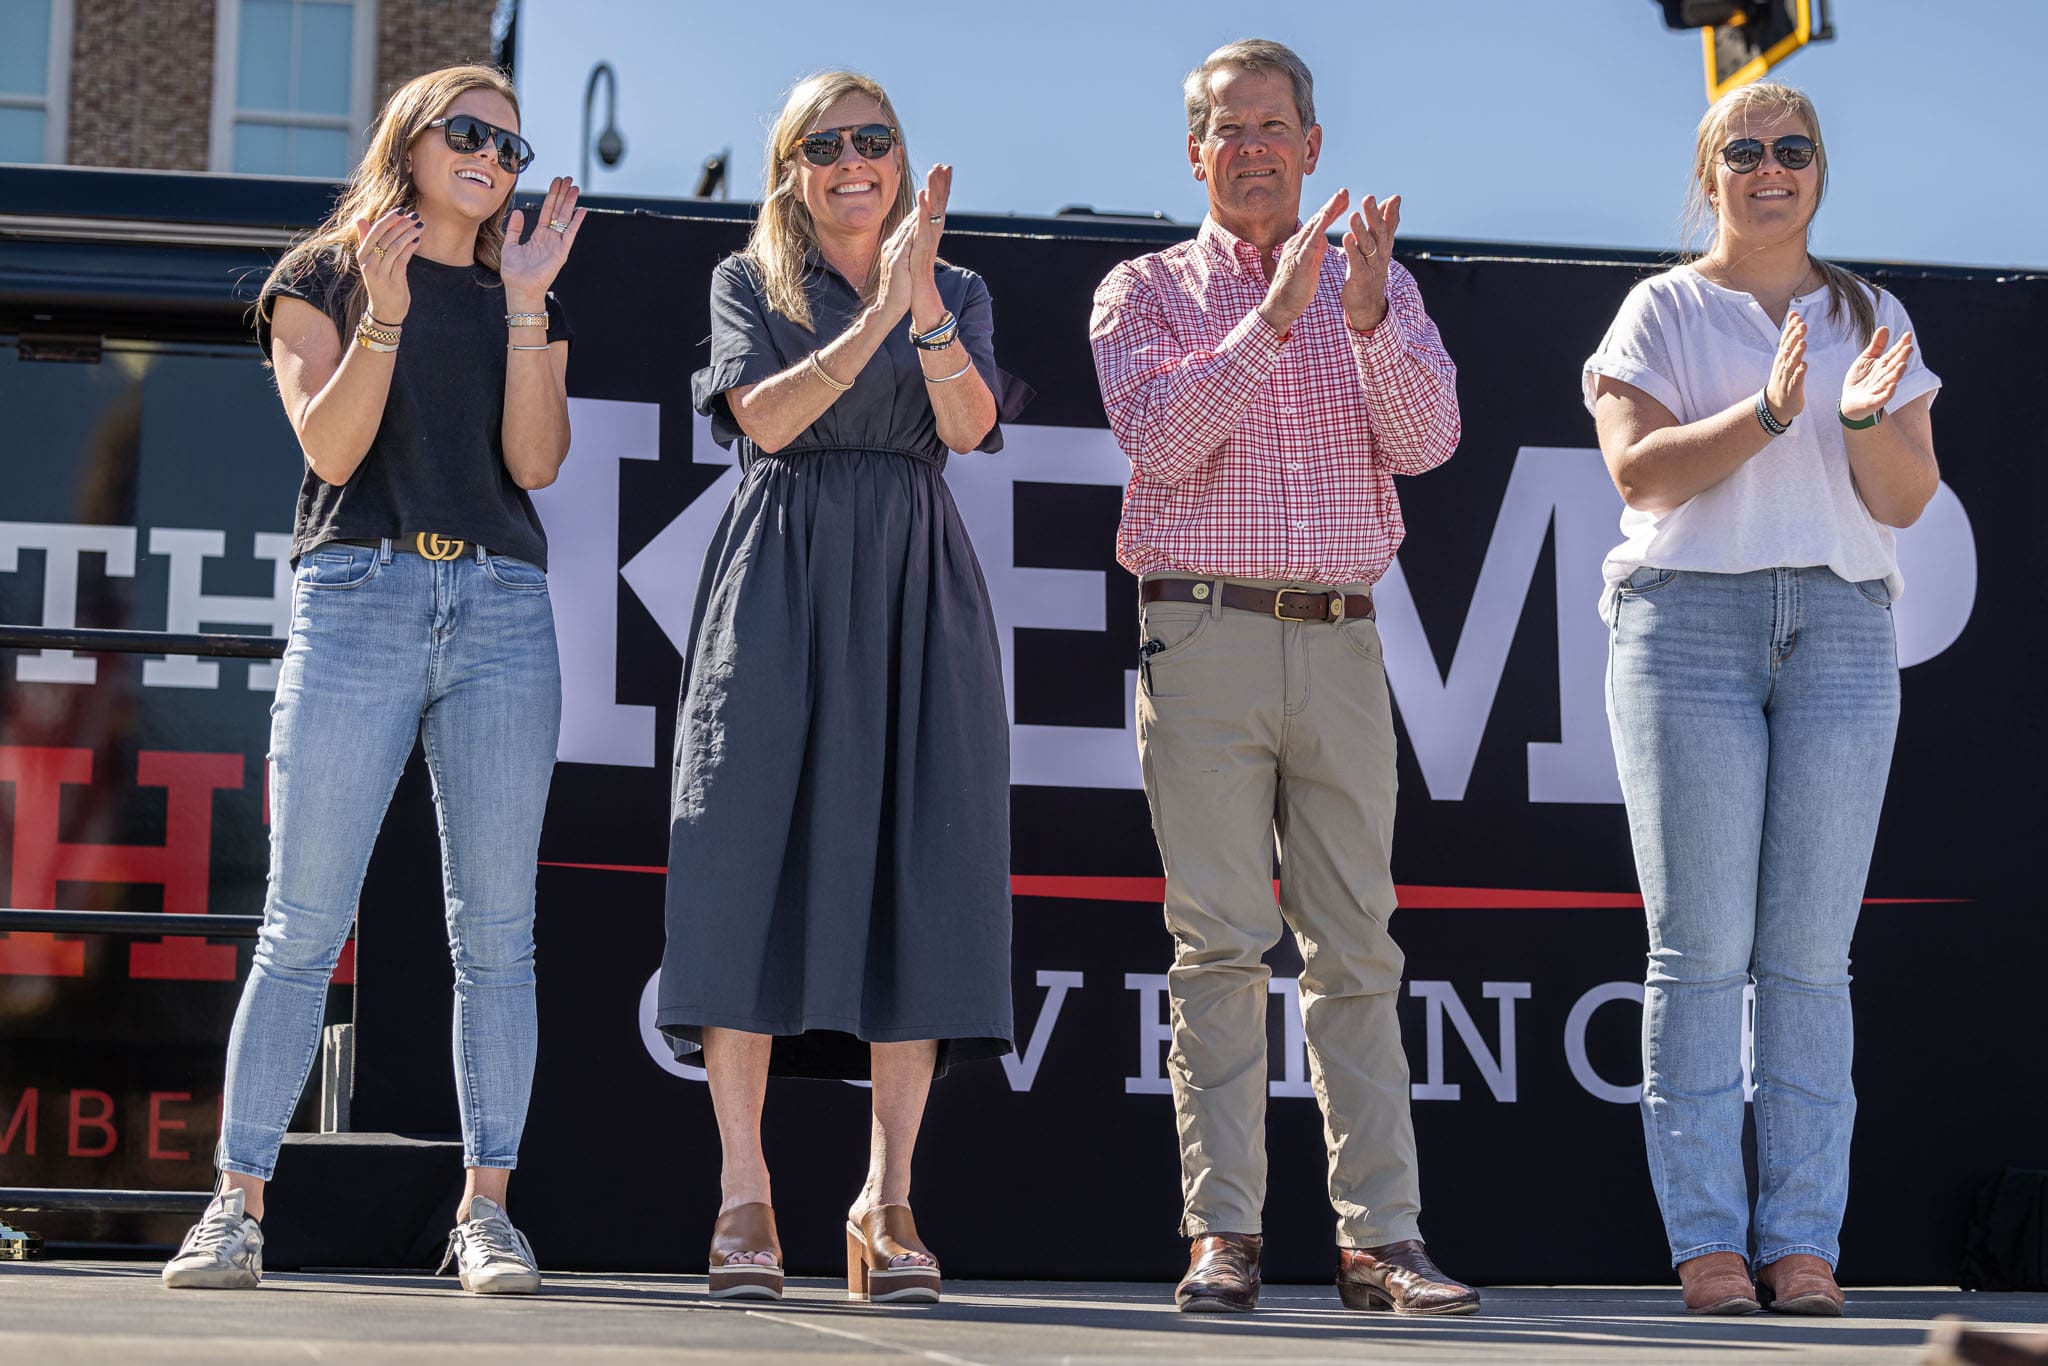 georgia-governor-Brain-Kemp-and-his-wife-marty-kemp-with-their-daugthers-Amy-kemp-and-lucy-kemp